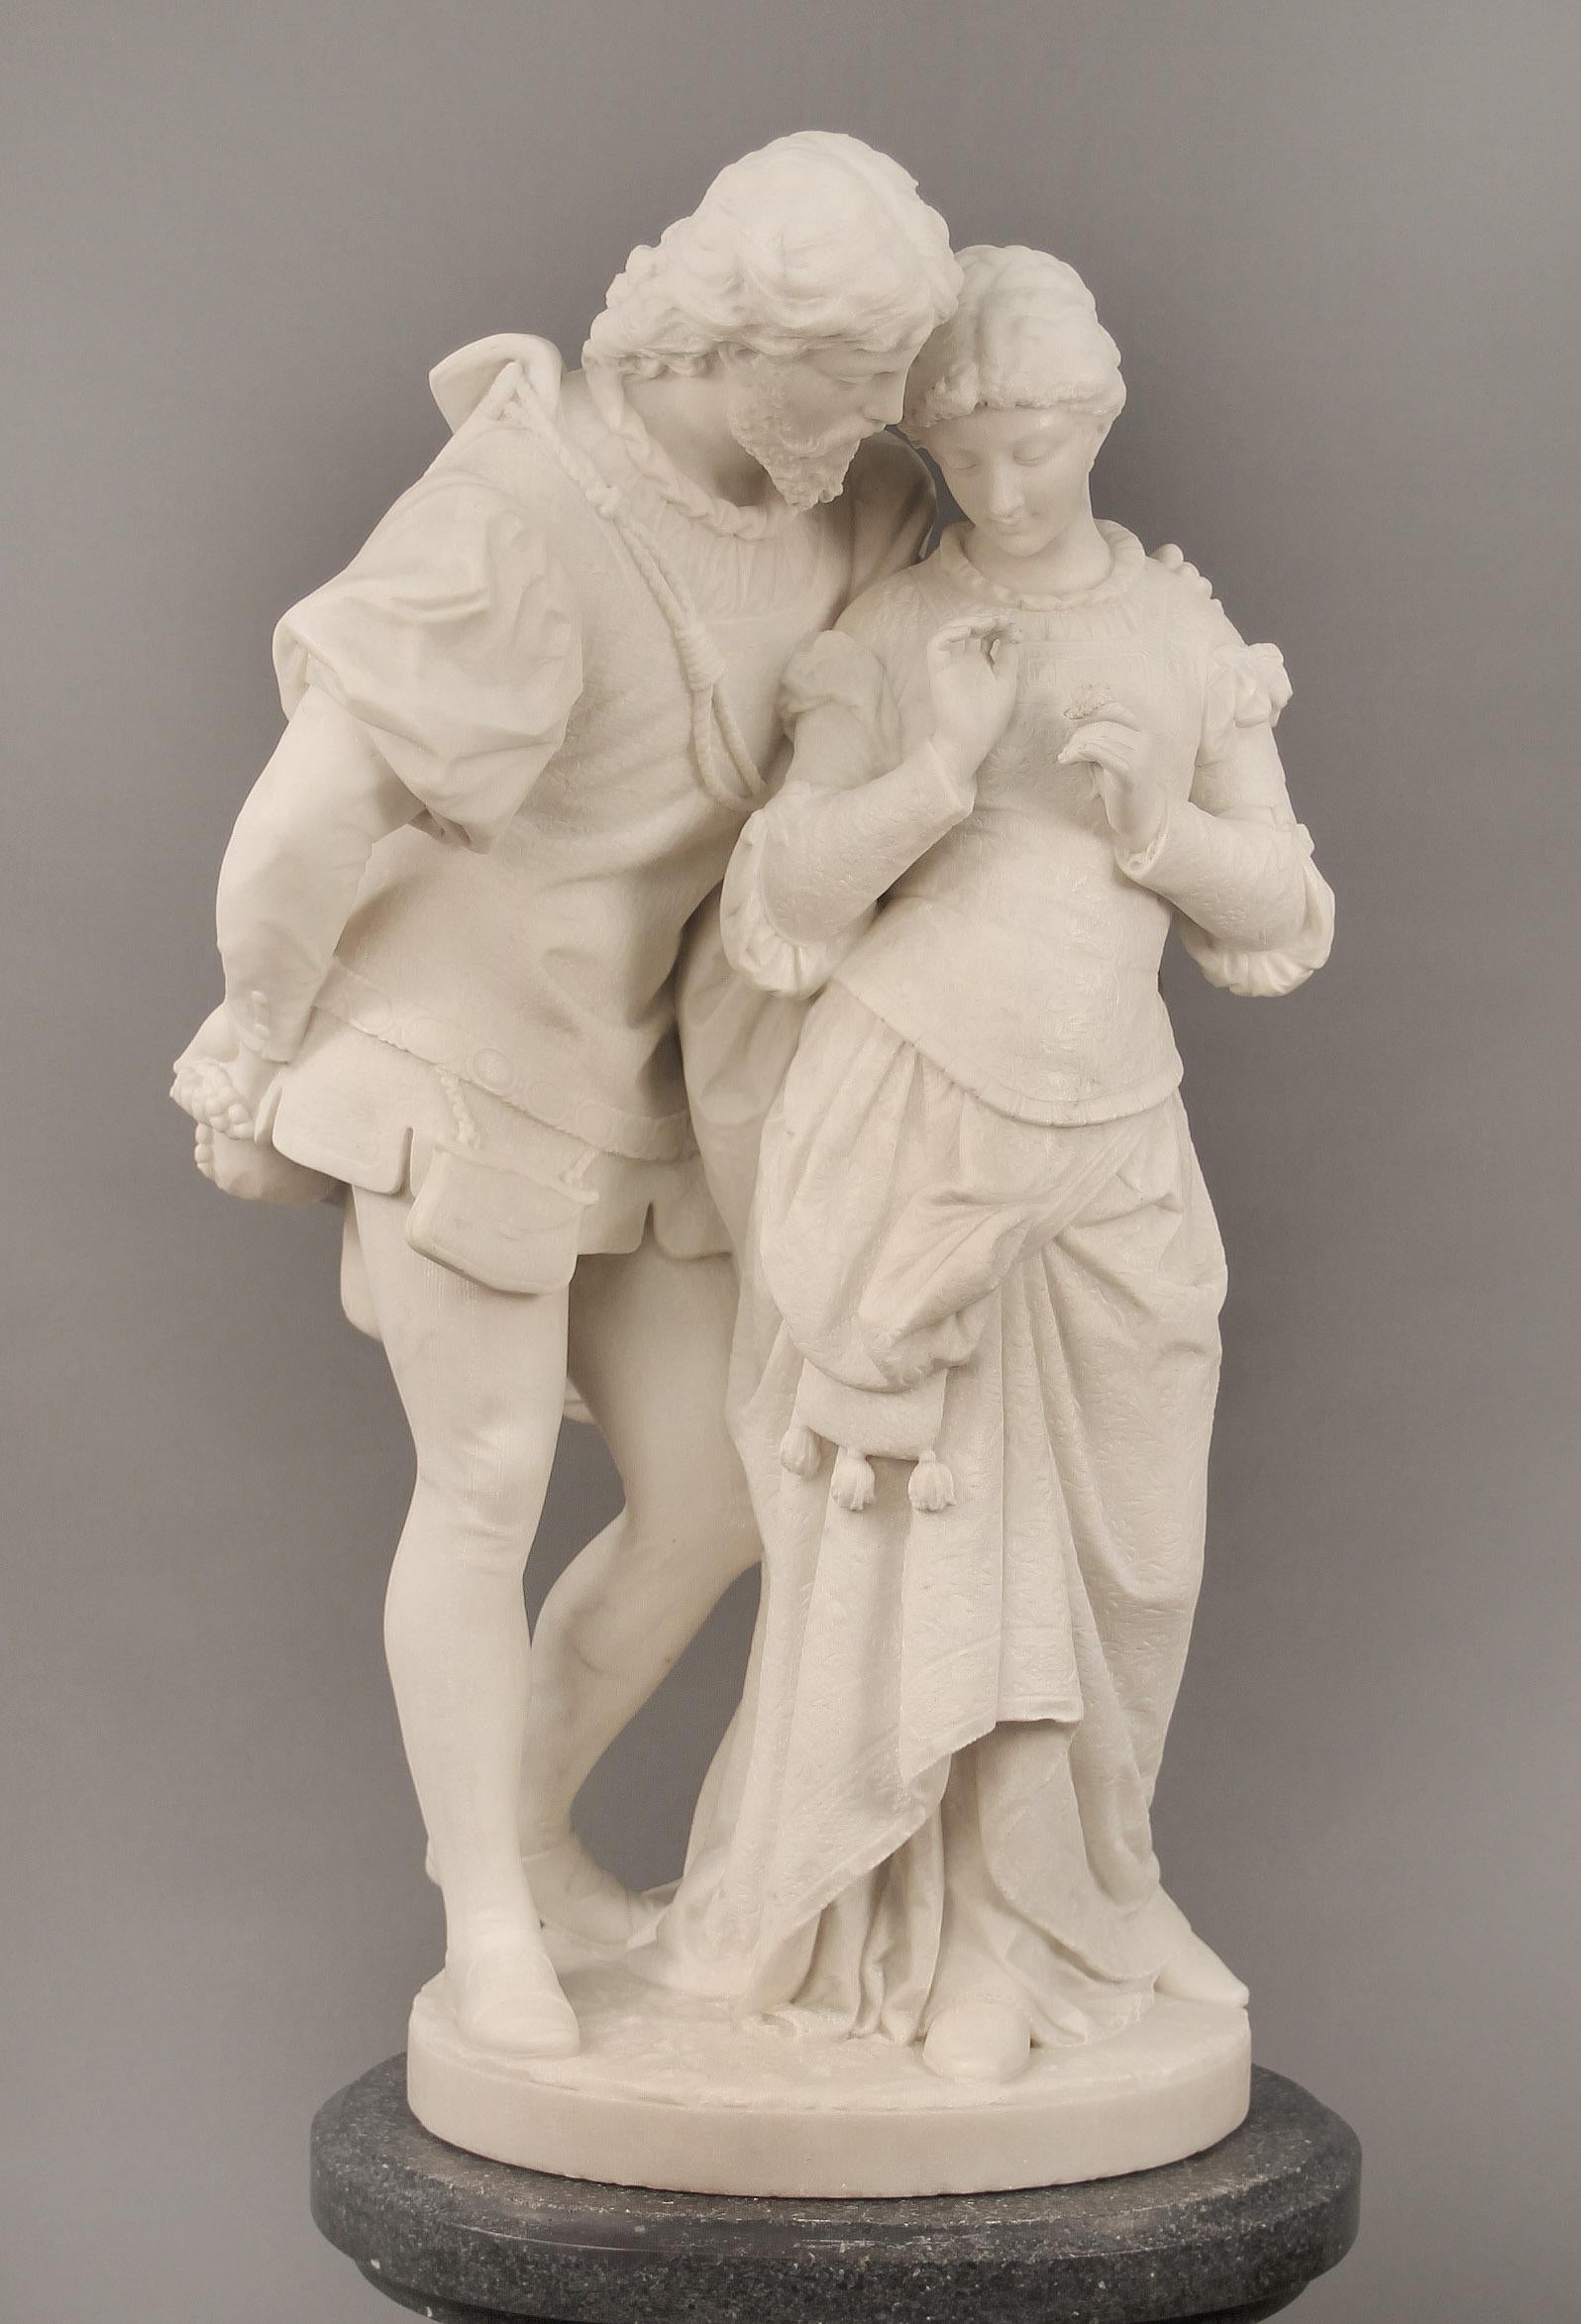 A fantastic late 19th century Italian white Carrara marble entitled “Paolo and Francesca” by Pasquale Romanelli

The finely carved sculpture depicting a scene from Dante’s Divine comedy wherein the doomed Paolo embraces Francesca. Standing on a